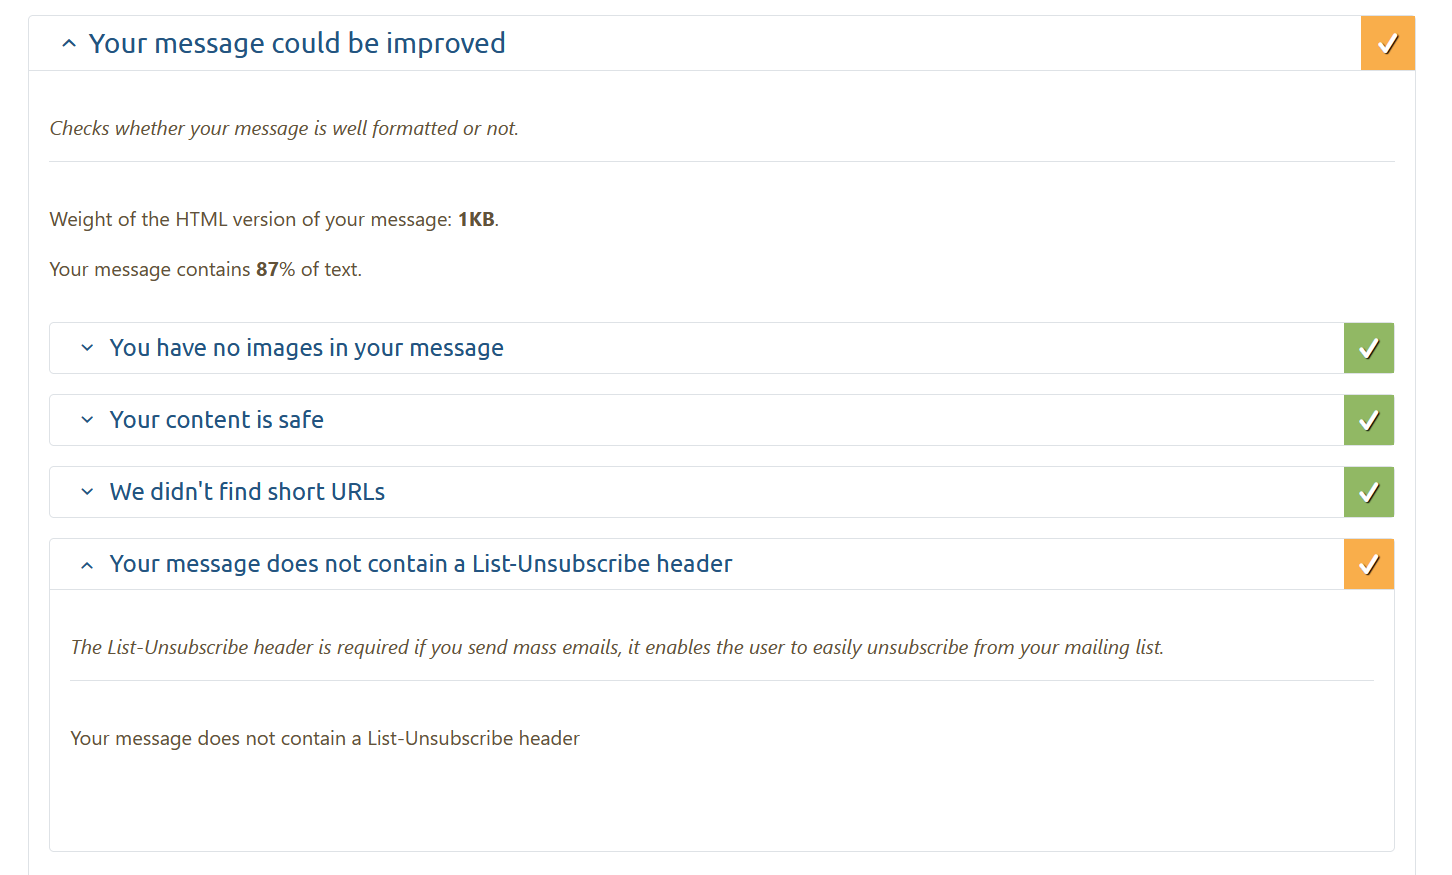 Your message does not contain a List-Unsubscribe header